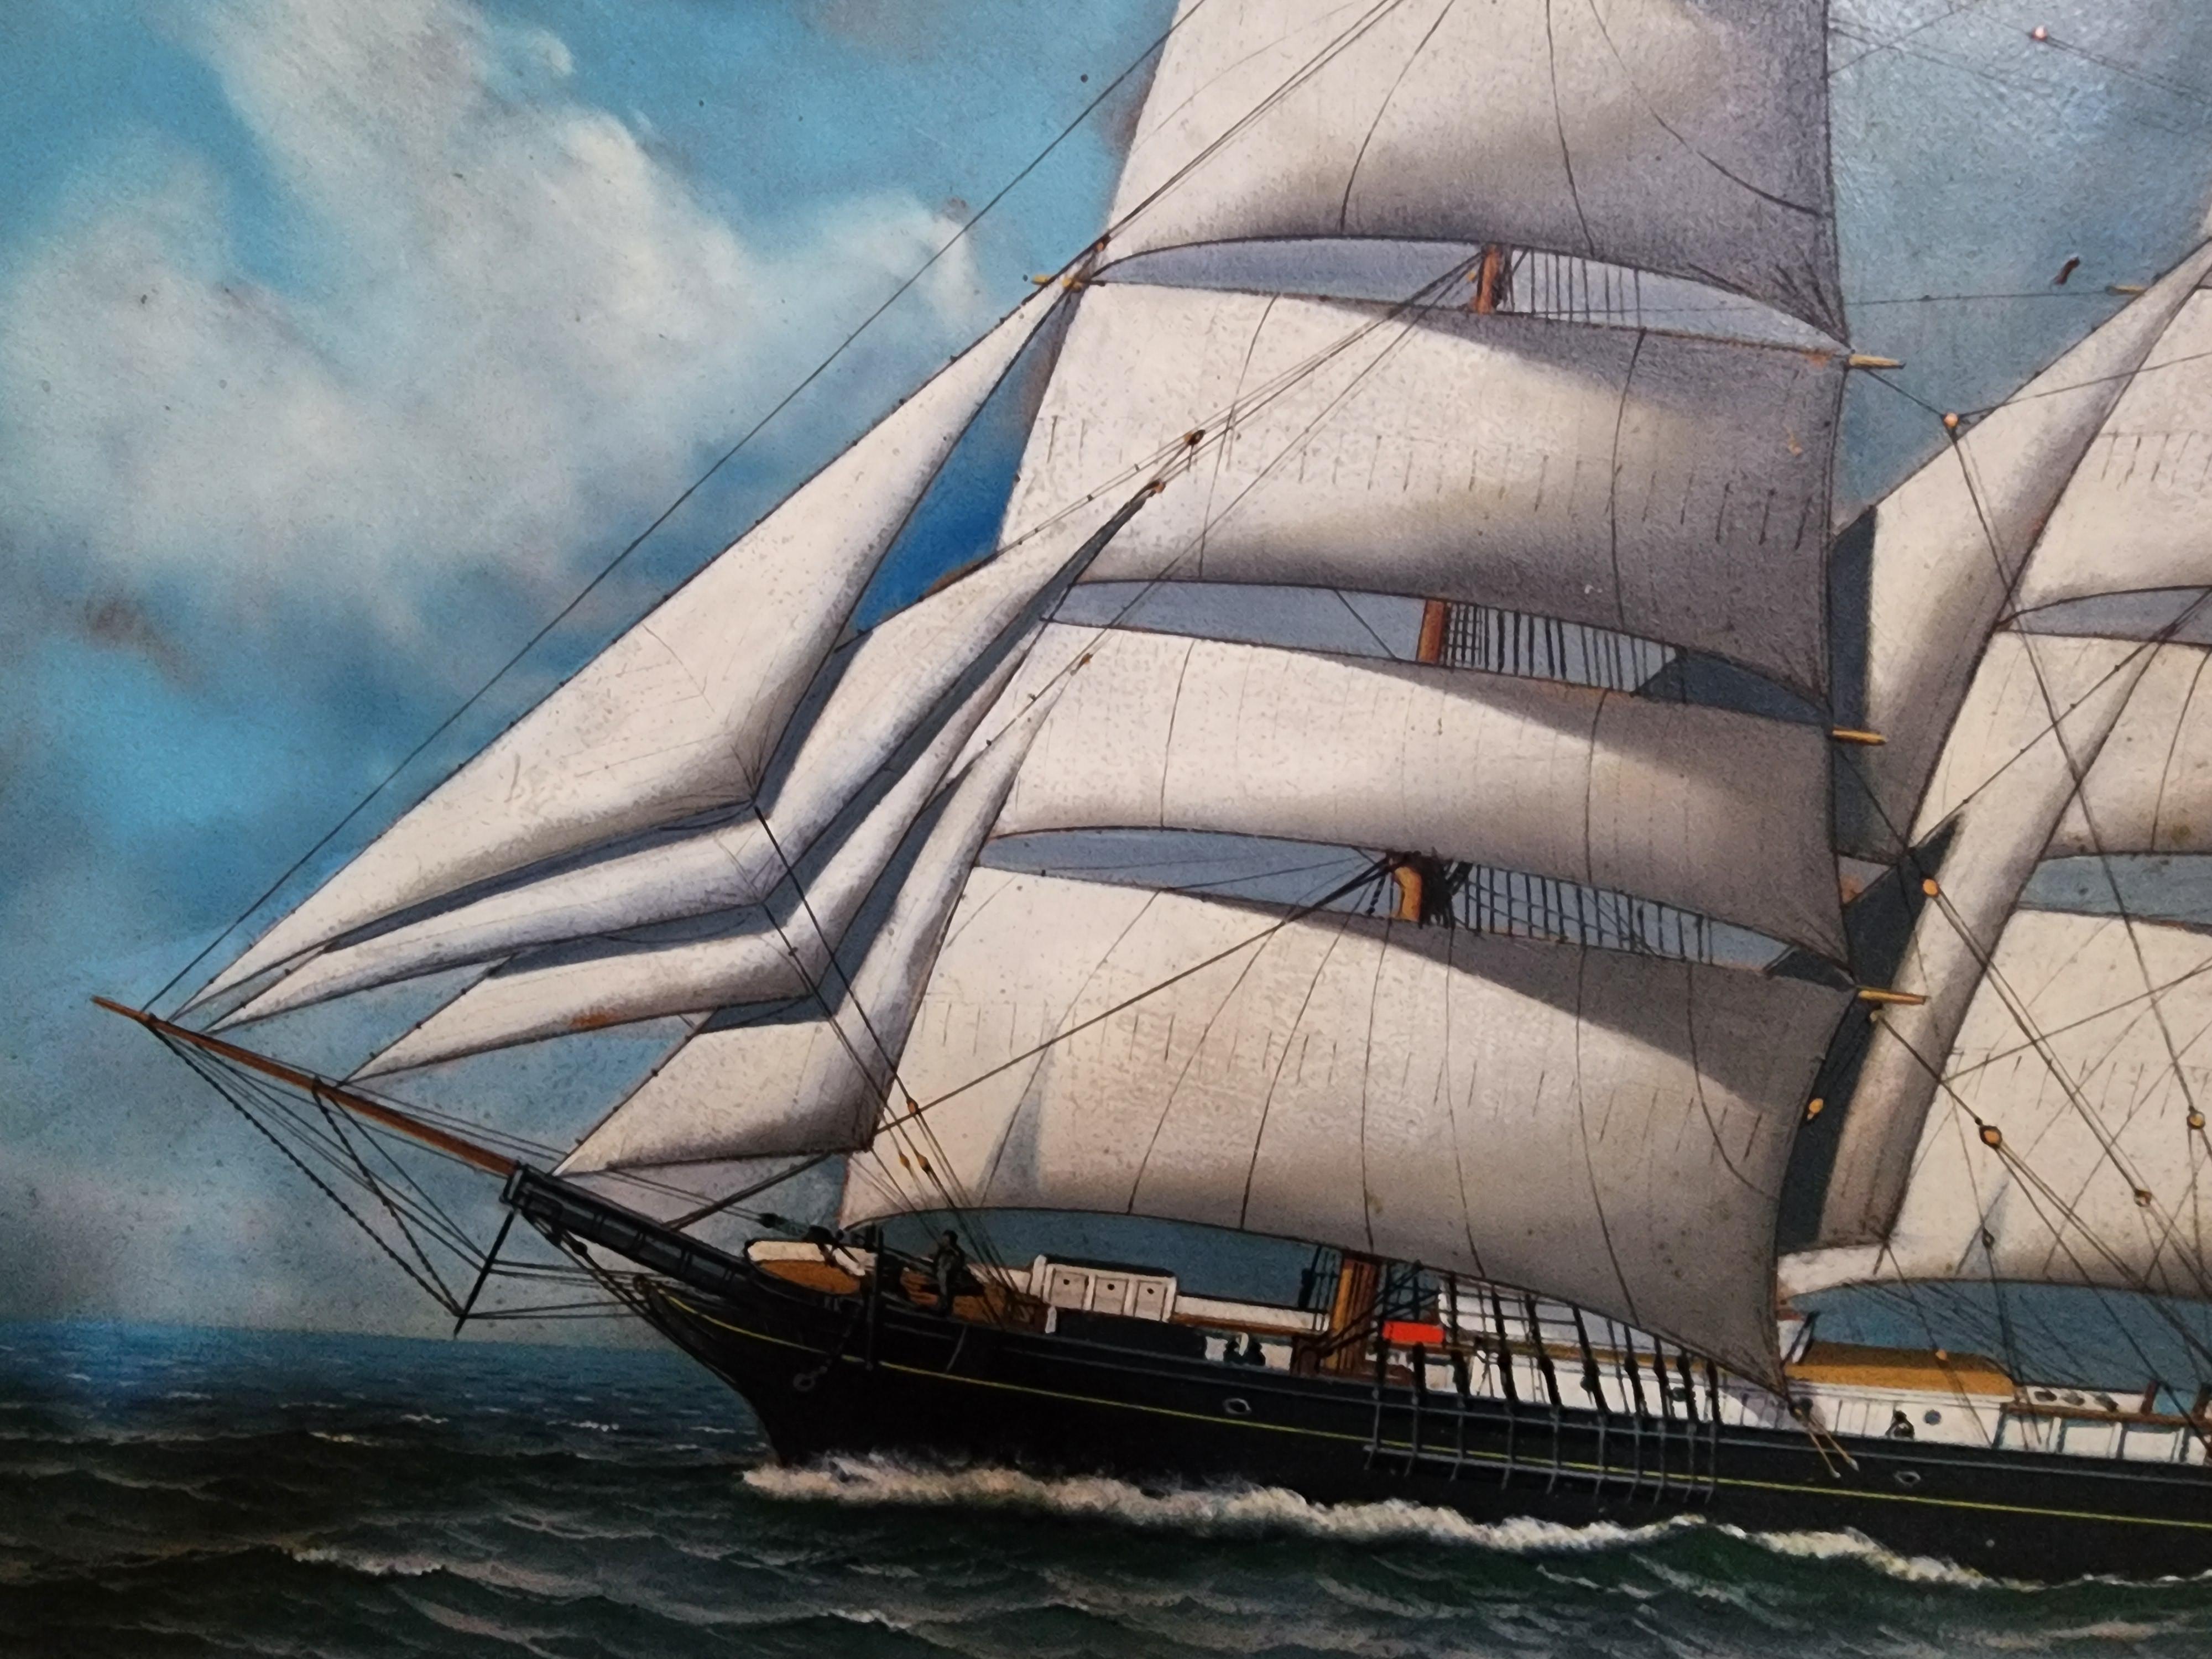 The ship William Volckens by the maritime painter Antonio Jacobsen.
Signed and dated lower right 